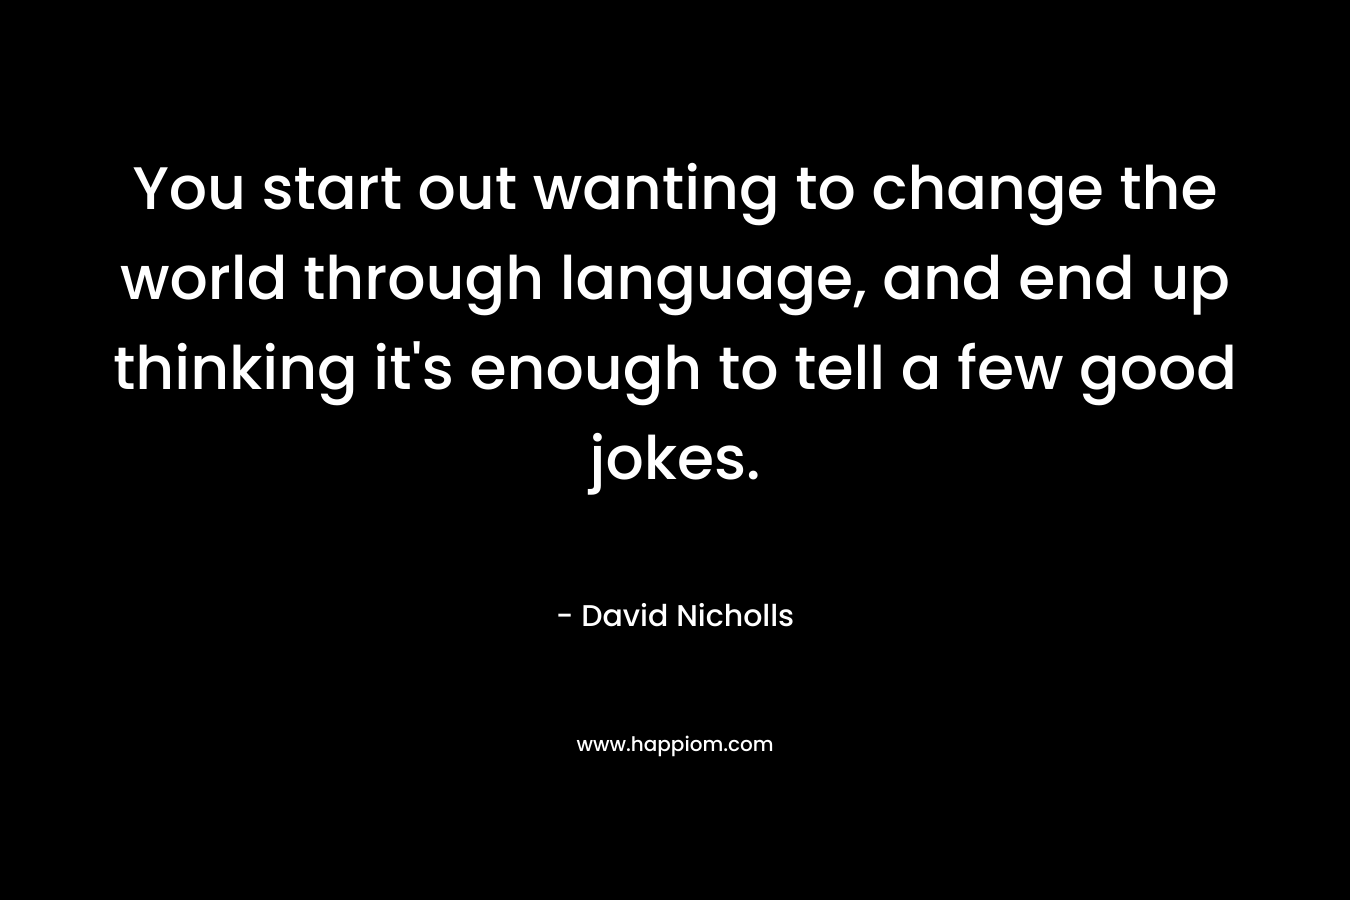 You start out wanting to change the world through language, and end up thinking it's enough to tell a few good jokes.